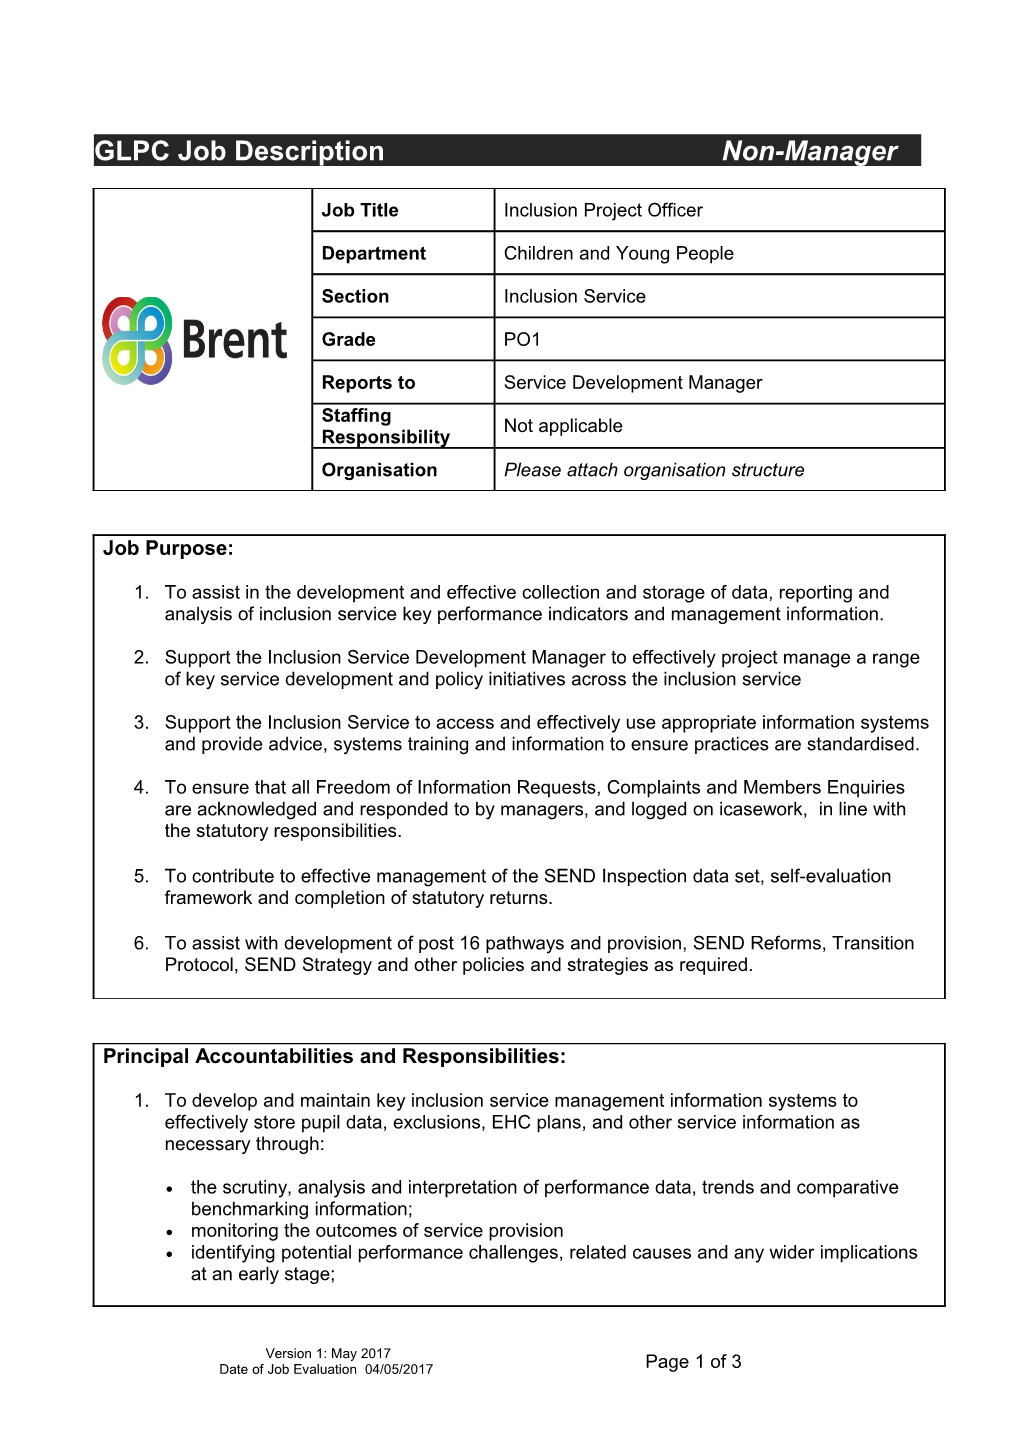 Application for Job Evaluation s7